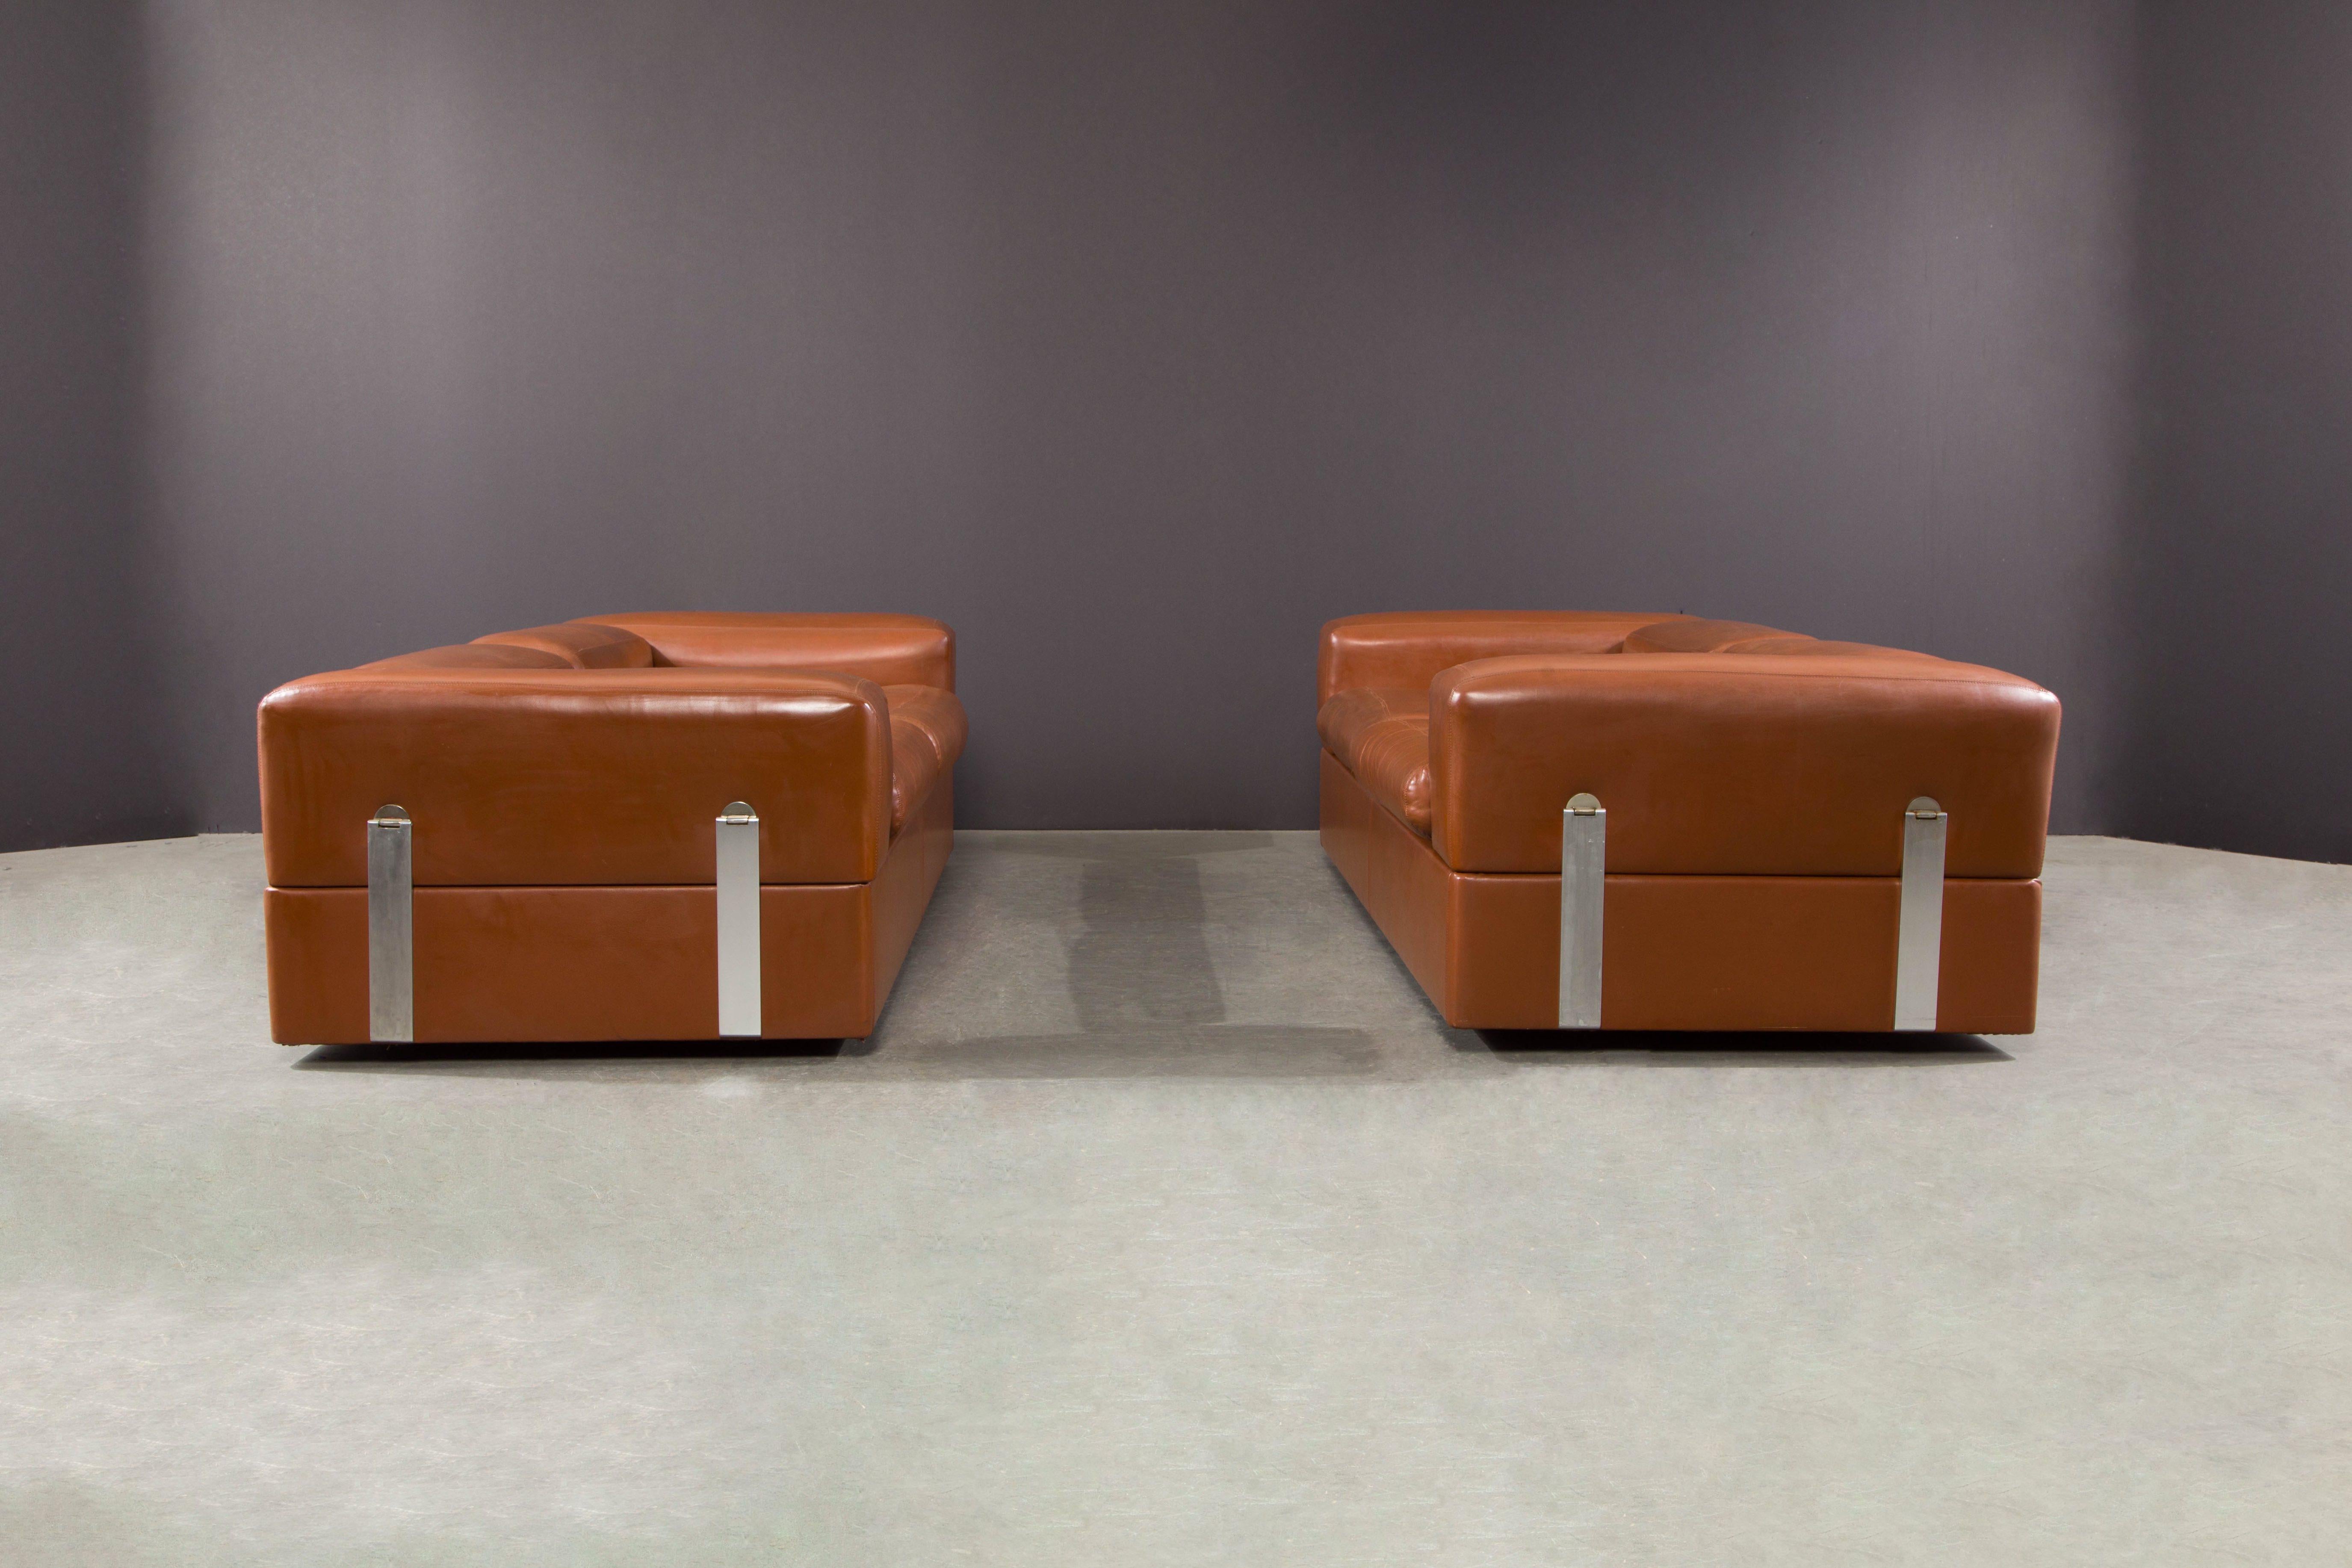 Mid-Century Modern Pair of Tito Agnoli Leather Convertible Sofas for Cinova, 1960s Italy, Signed